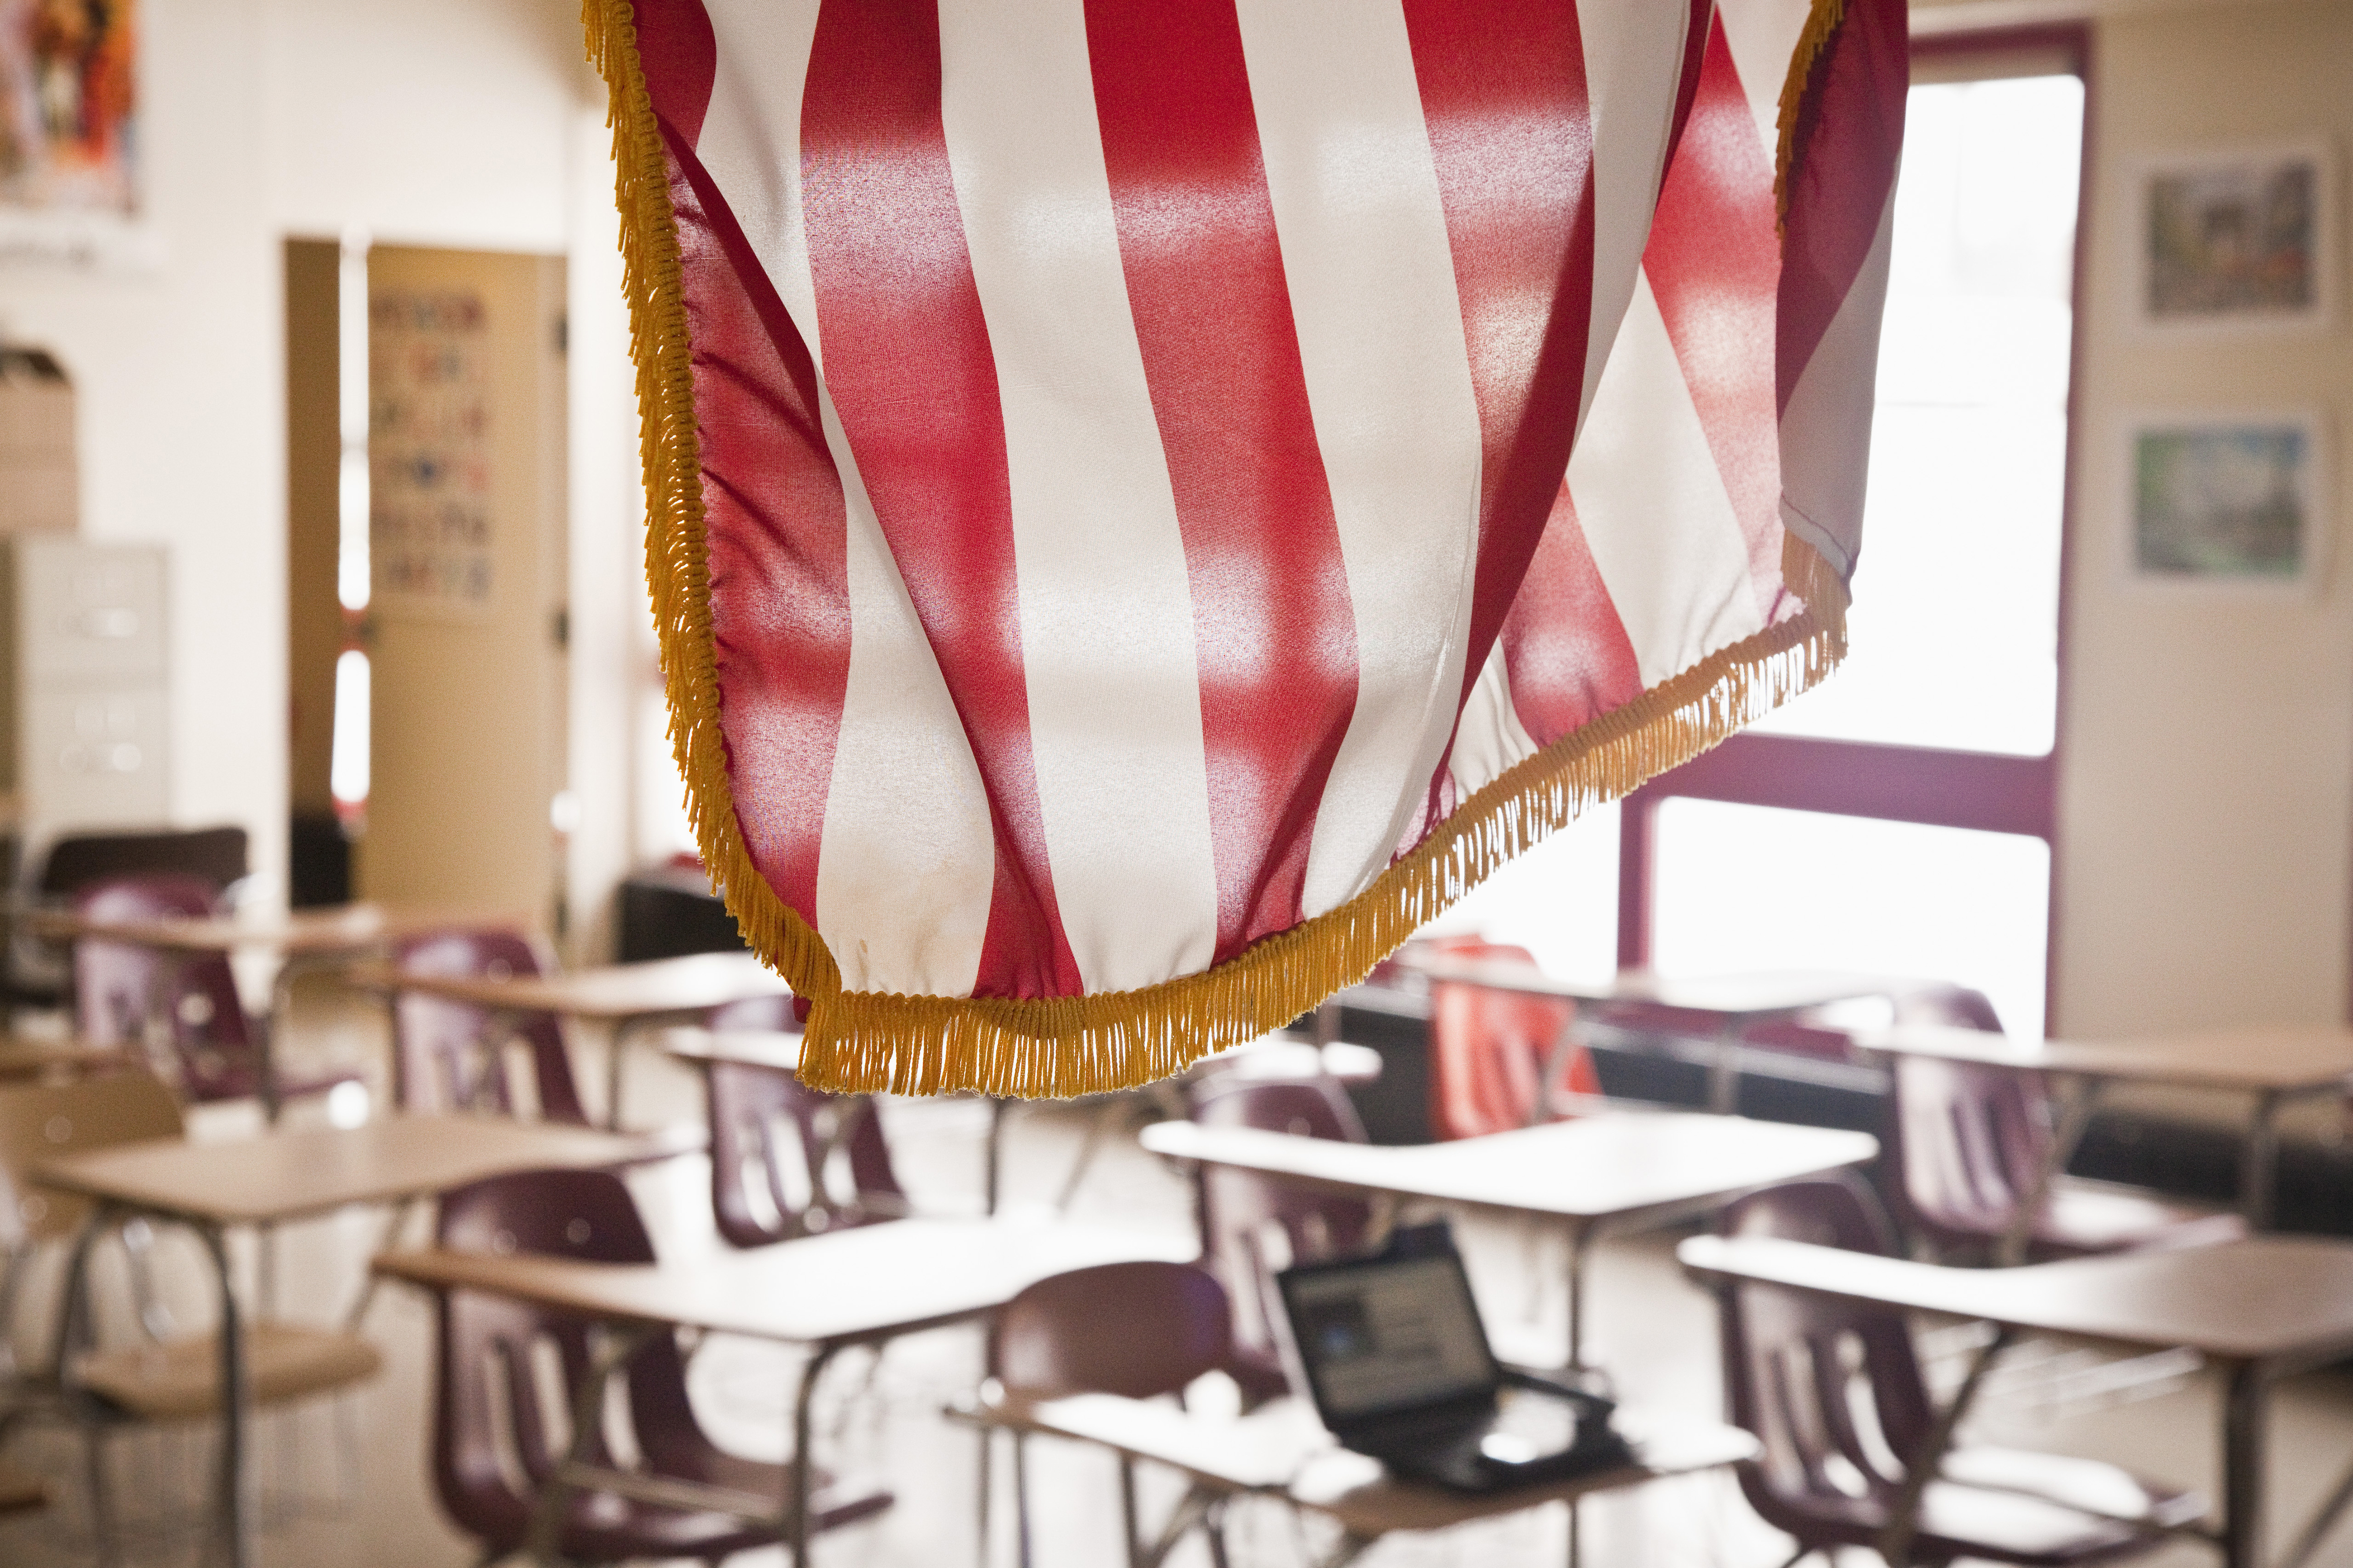 An empty classroom with an American flag in the foreground